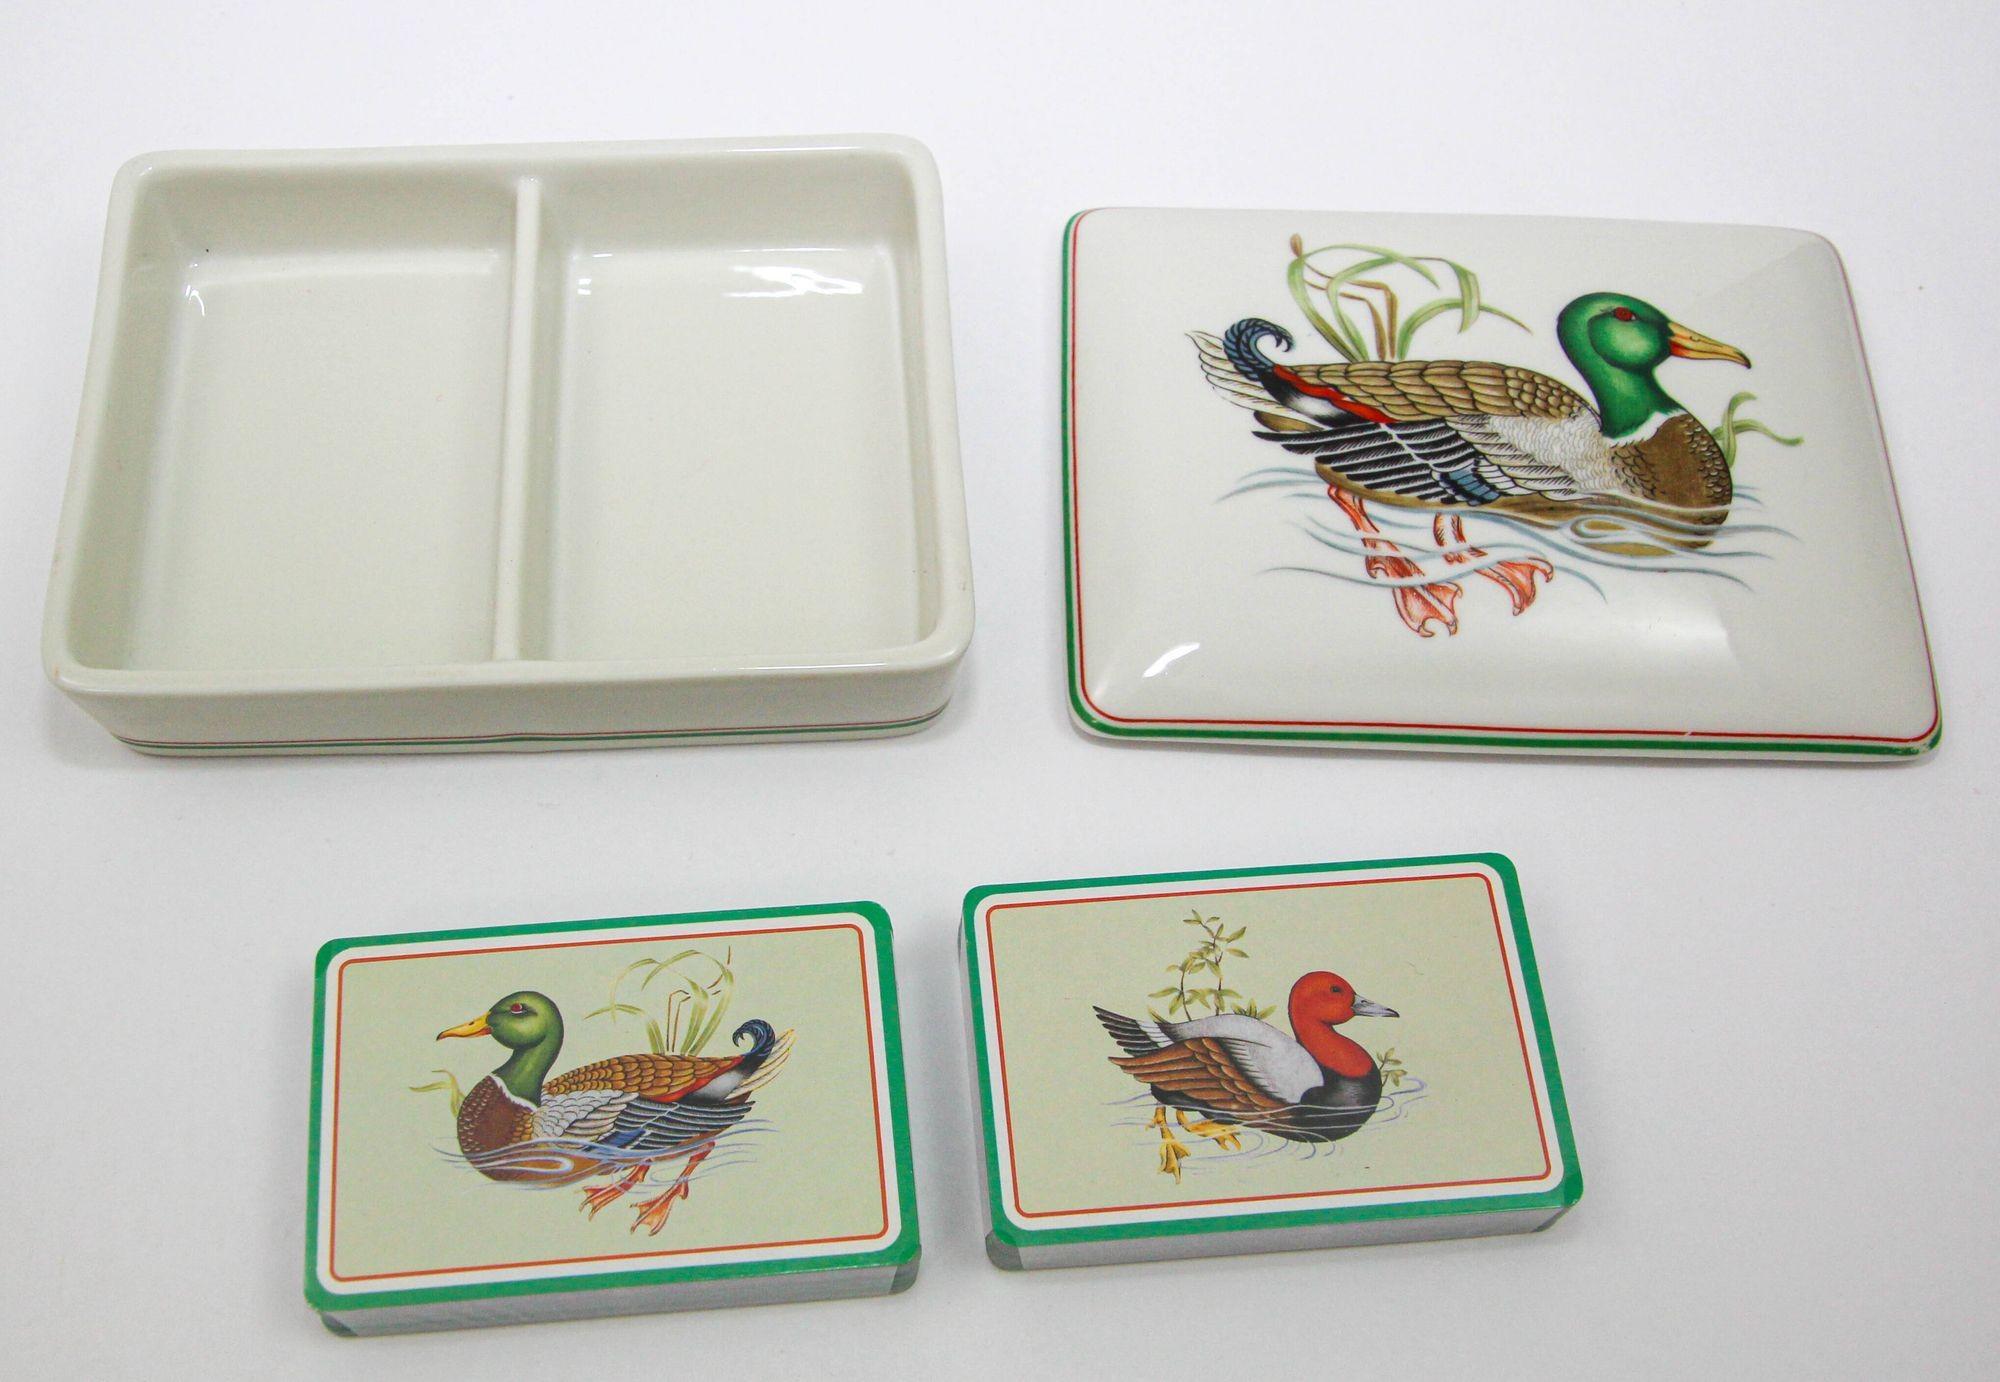 Fitz and Floyd Porcelain Box with Bridge Playing Cards 1980 Japan In Good Condition For Sale In North Hollywood, CA